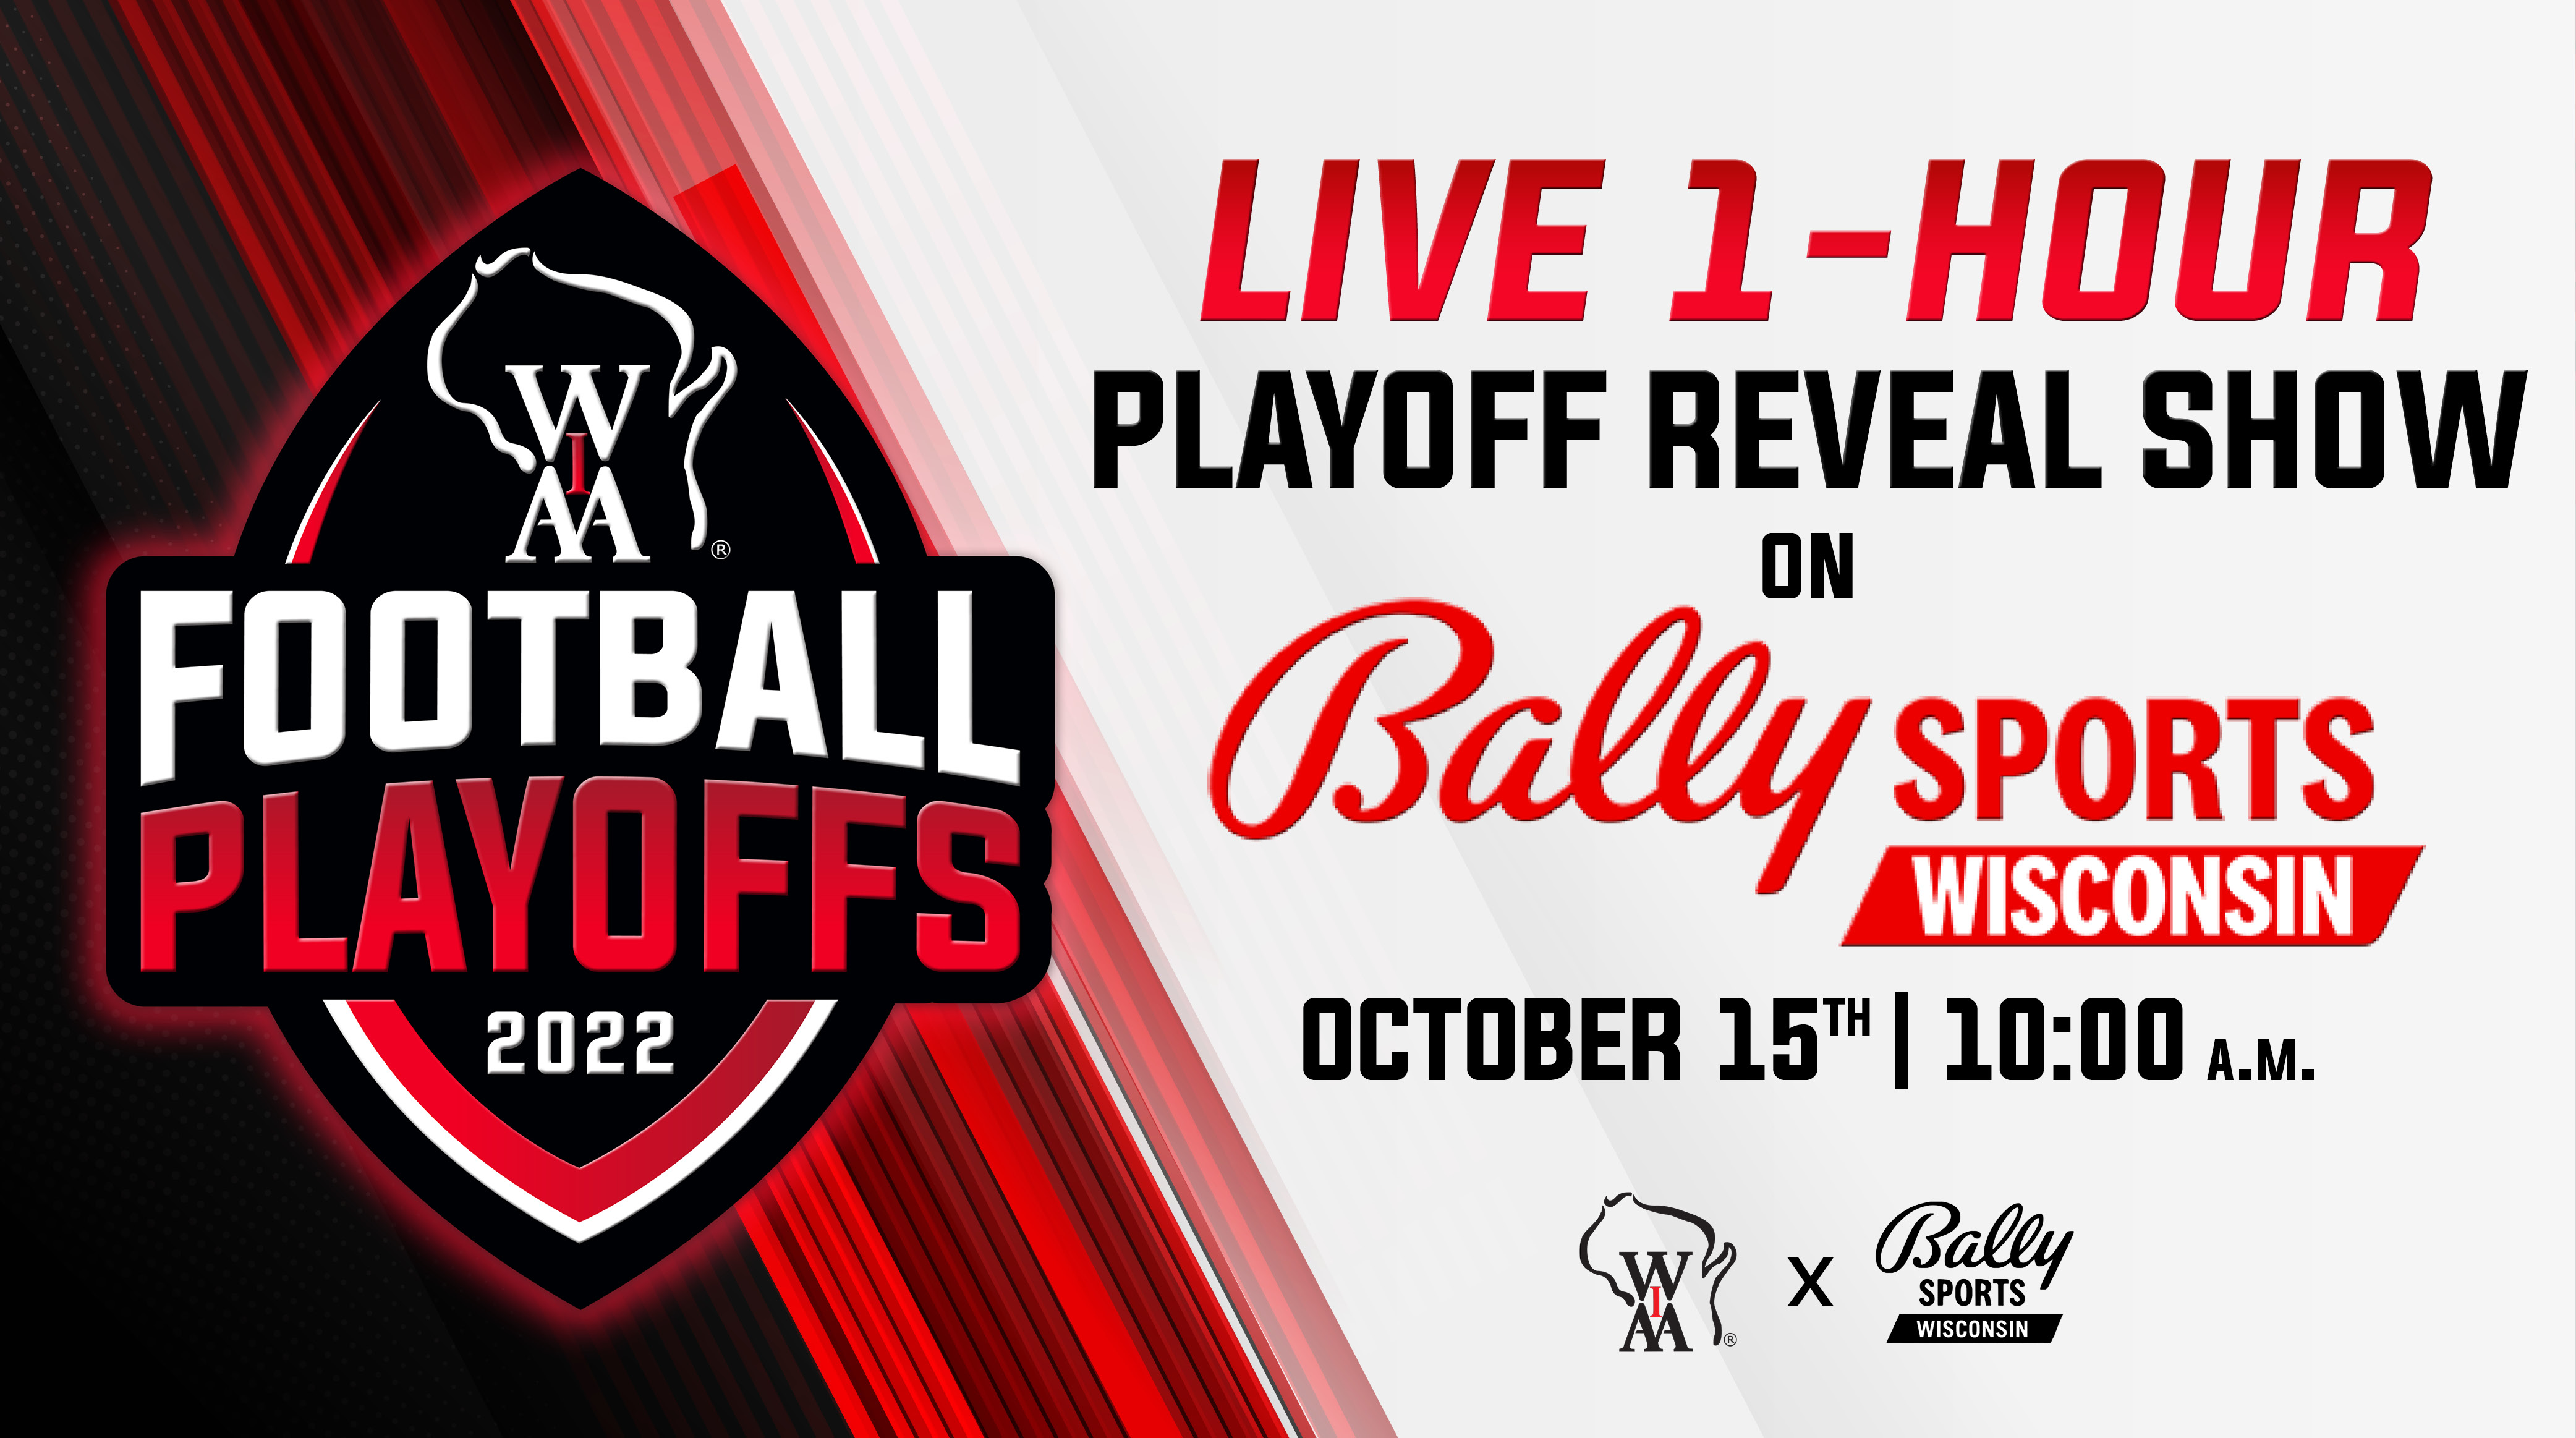 Football Playoff Qualifiers and Pairings to be Announced on Live Show